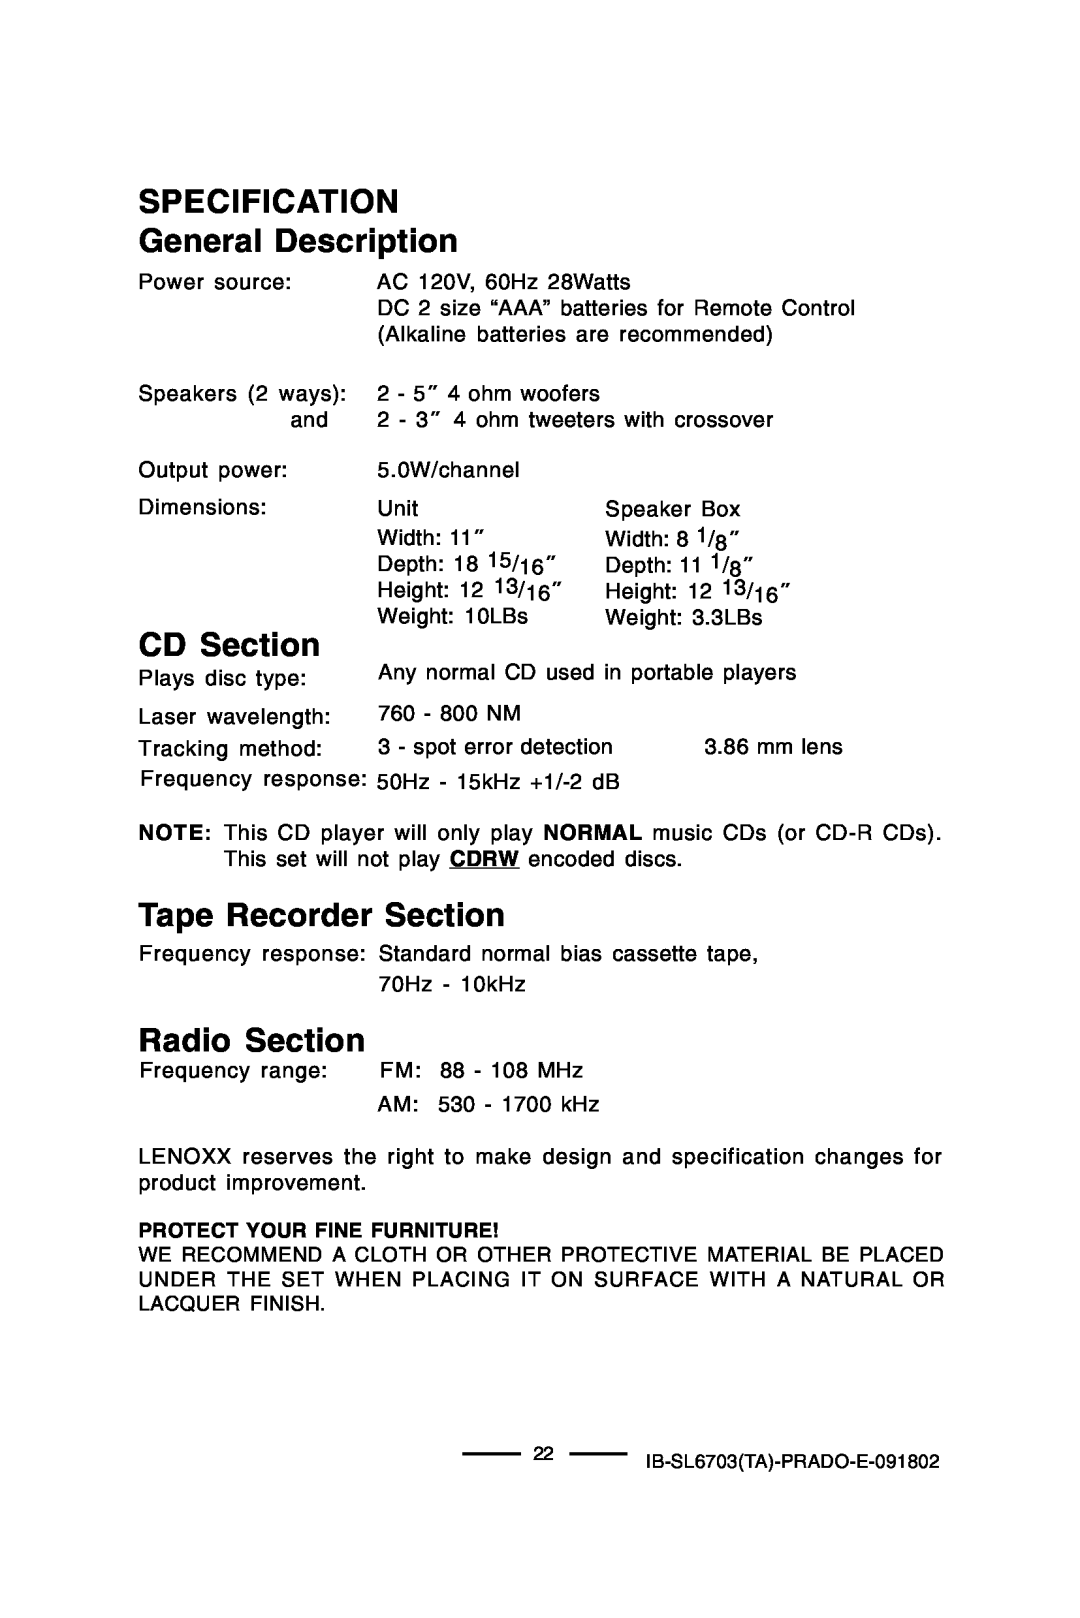 Lenoxx Electronics SL-6703 manual SPECIFICATION General Description, CD Section, Tape Recorder Section, Radio Section 